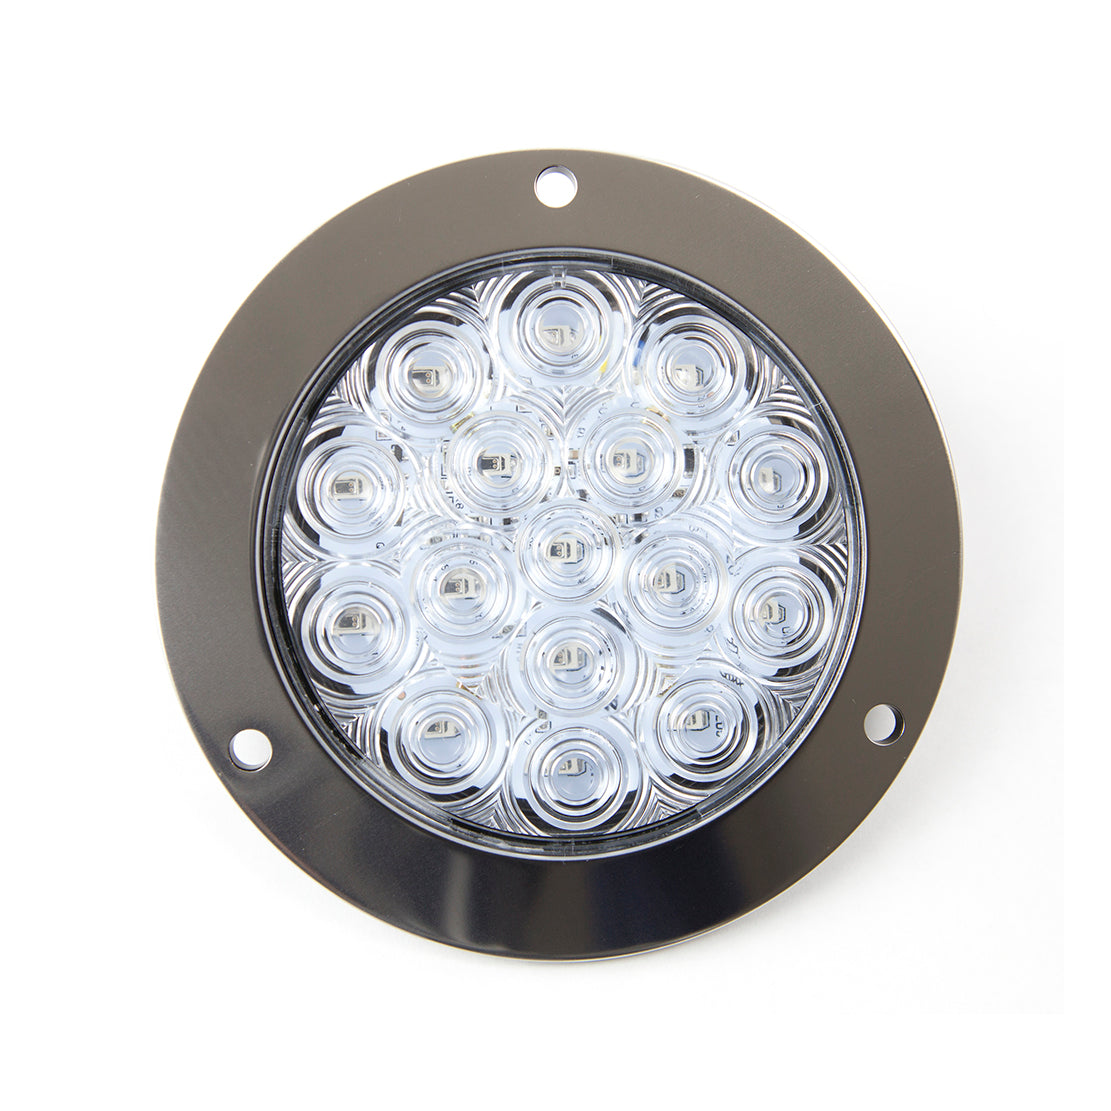 TURN SIGNAL LED LIGHT WITH STAINLESS FLANGE A/C